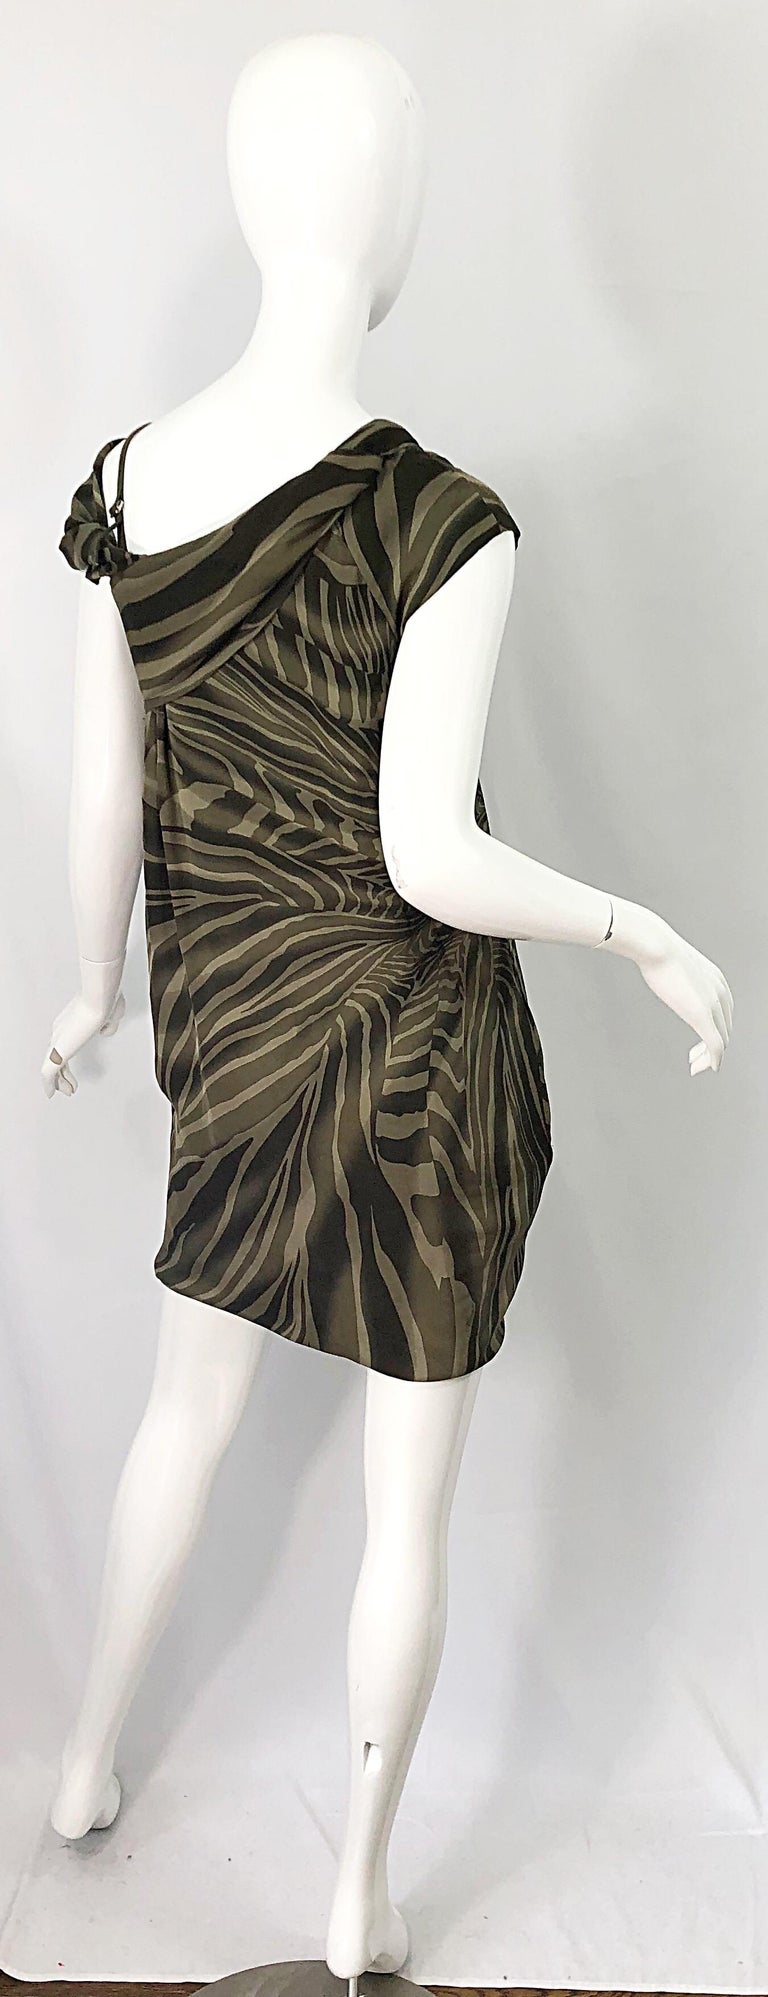 Tom Ford for Gucci Olive + Khaki Zebra Print Silk Chiffon Off Shoulder Dress In Excellent Condition For Sale In San Diego, CA